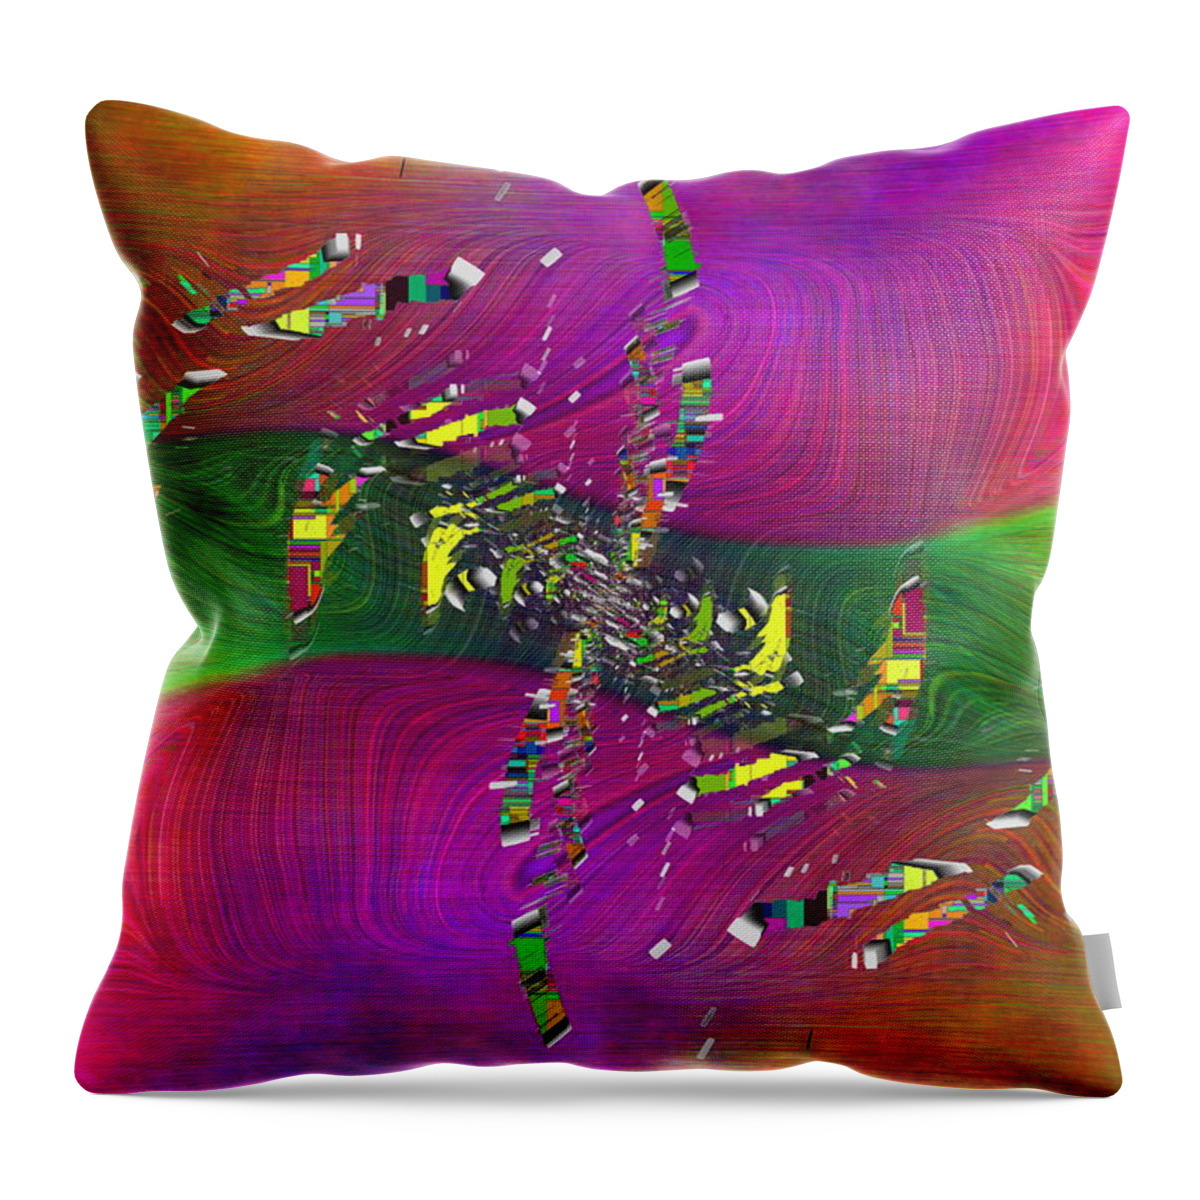 Abstract Throw Pillow featuring the digital art Abstract Cubed 357 by Tim Allen